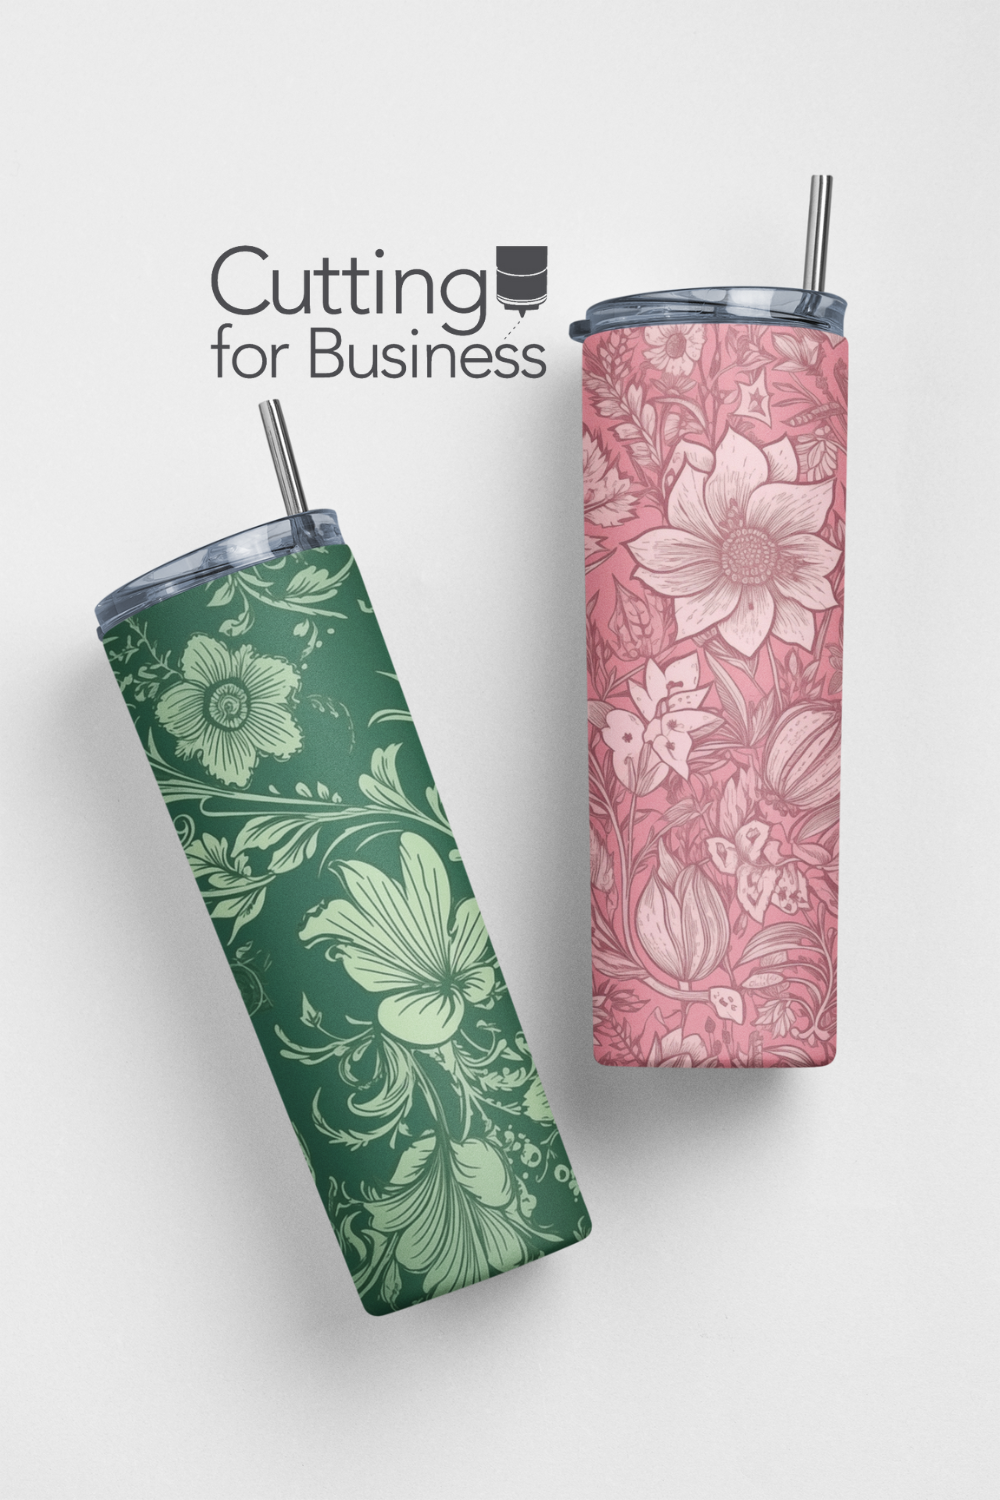 Do's and Don'ts of Watermarking Your Product Photos - Example 4 - cuttingforbusiness.com